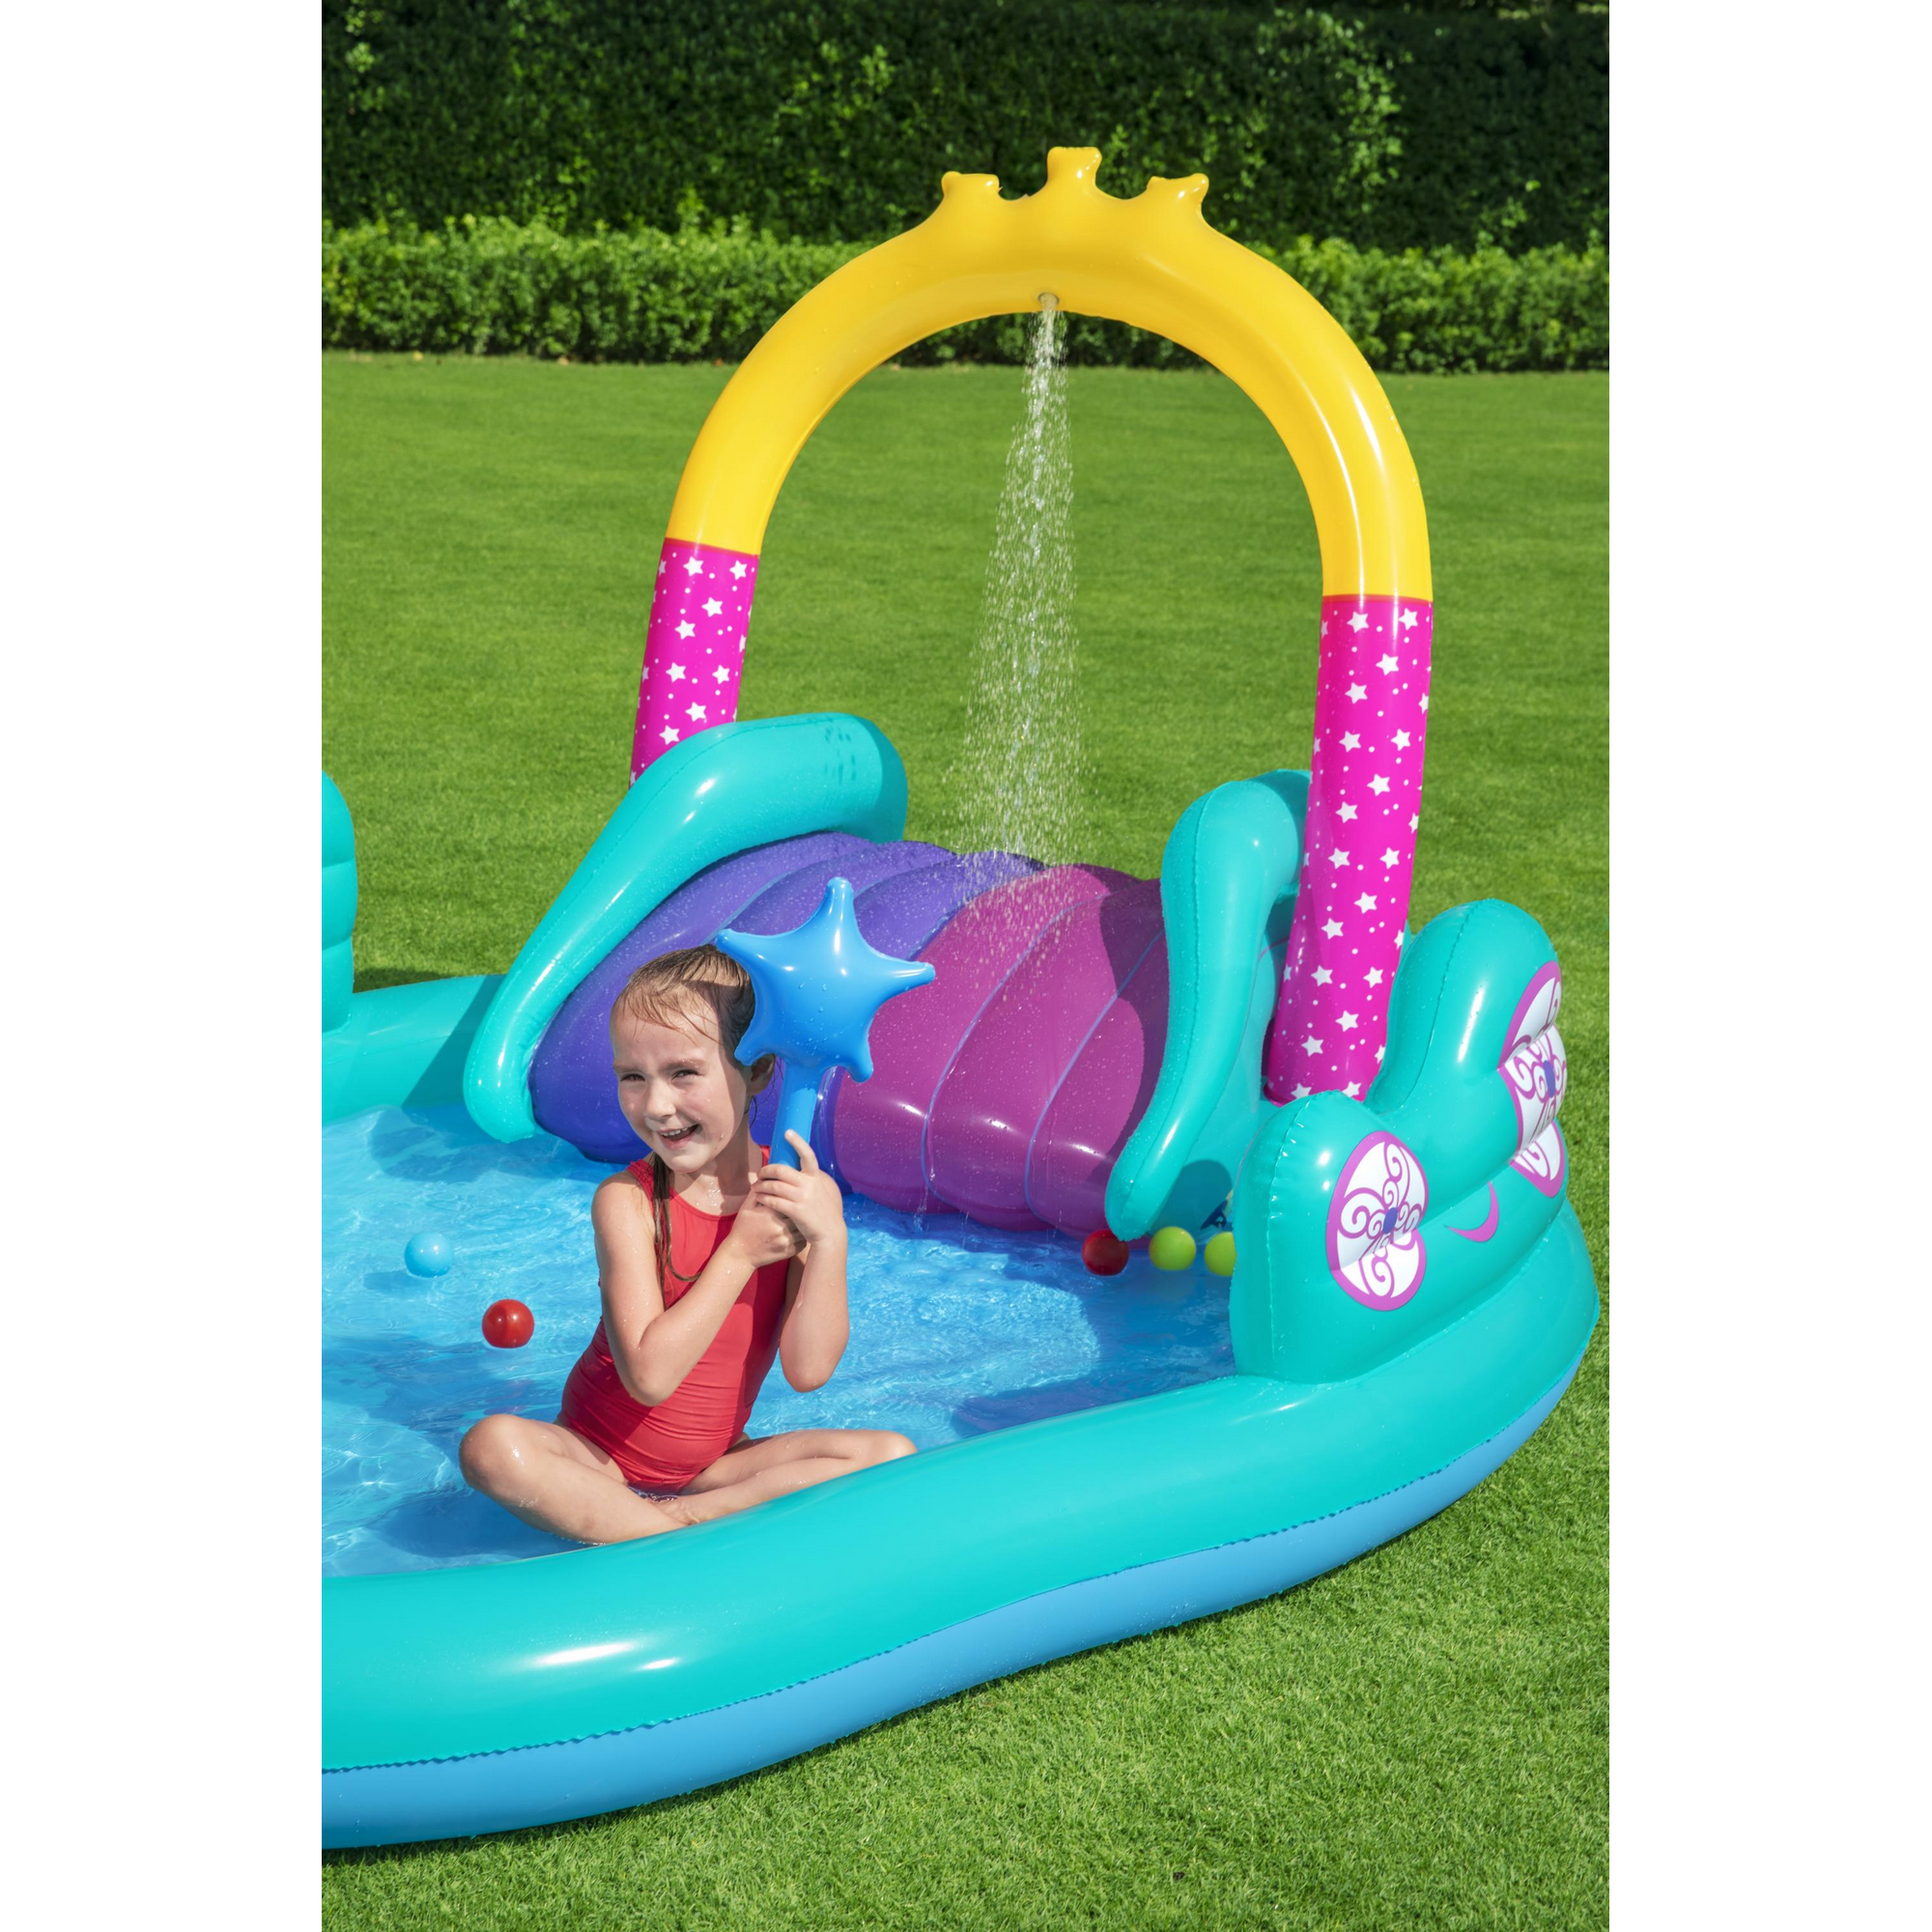 Wasserspielcenter 'Magical Unicorn' bunt 274 x 198 x 137 + product picture